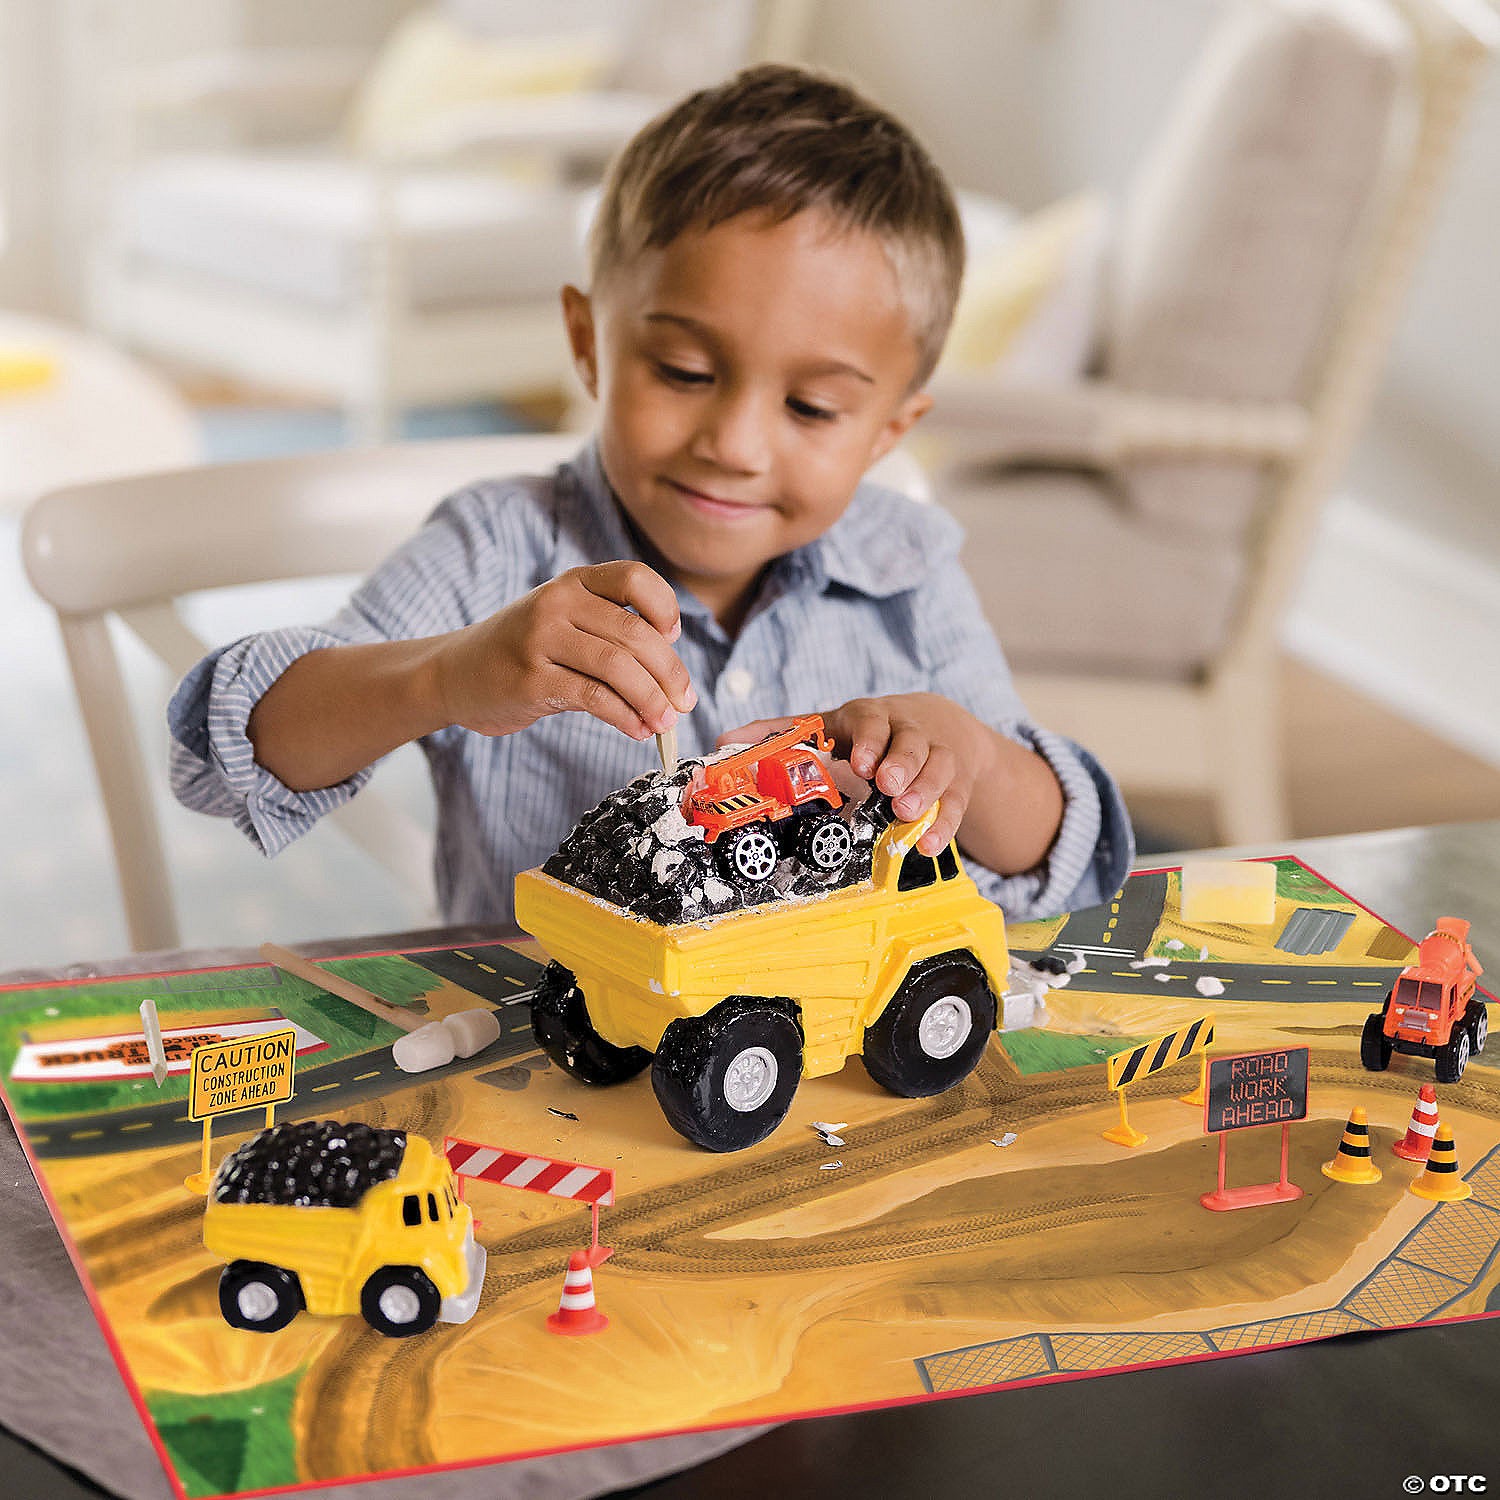 Dig It Up! Giant Truck Discovery by Mindware #13993223